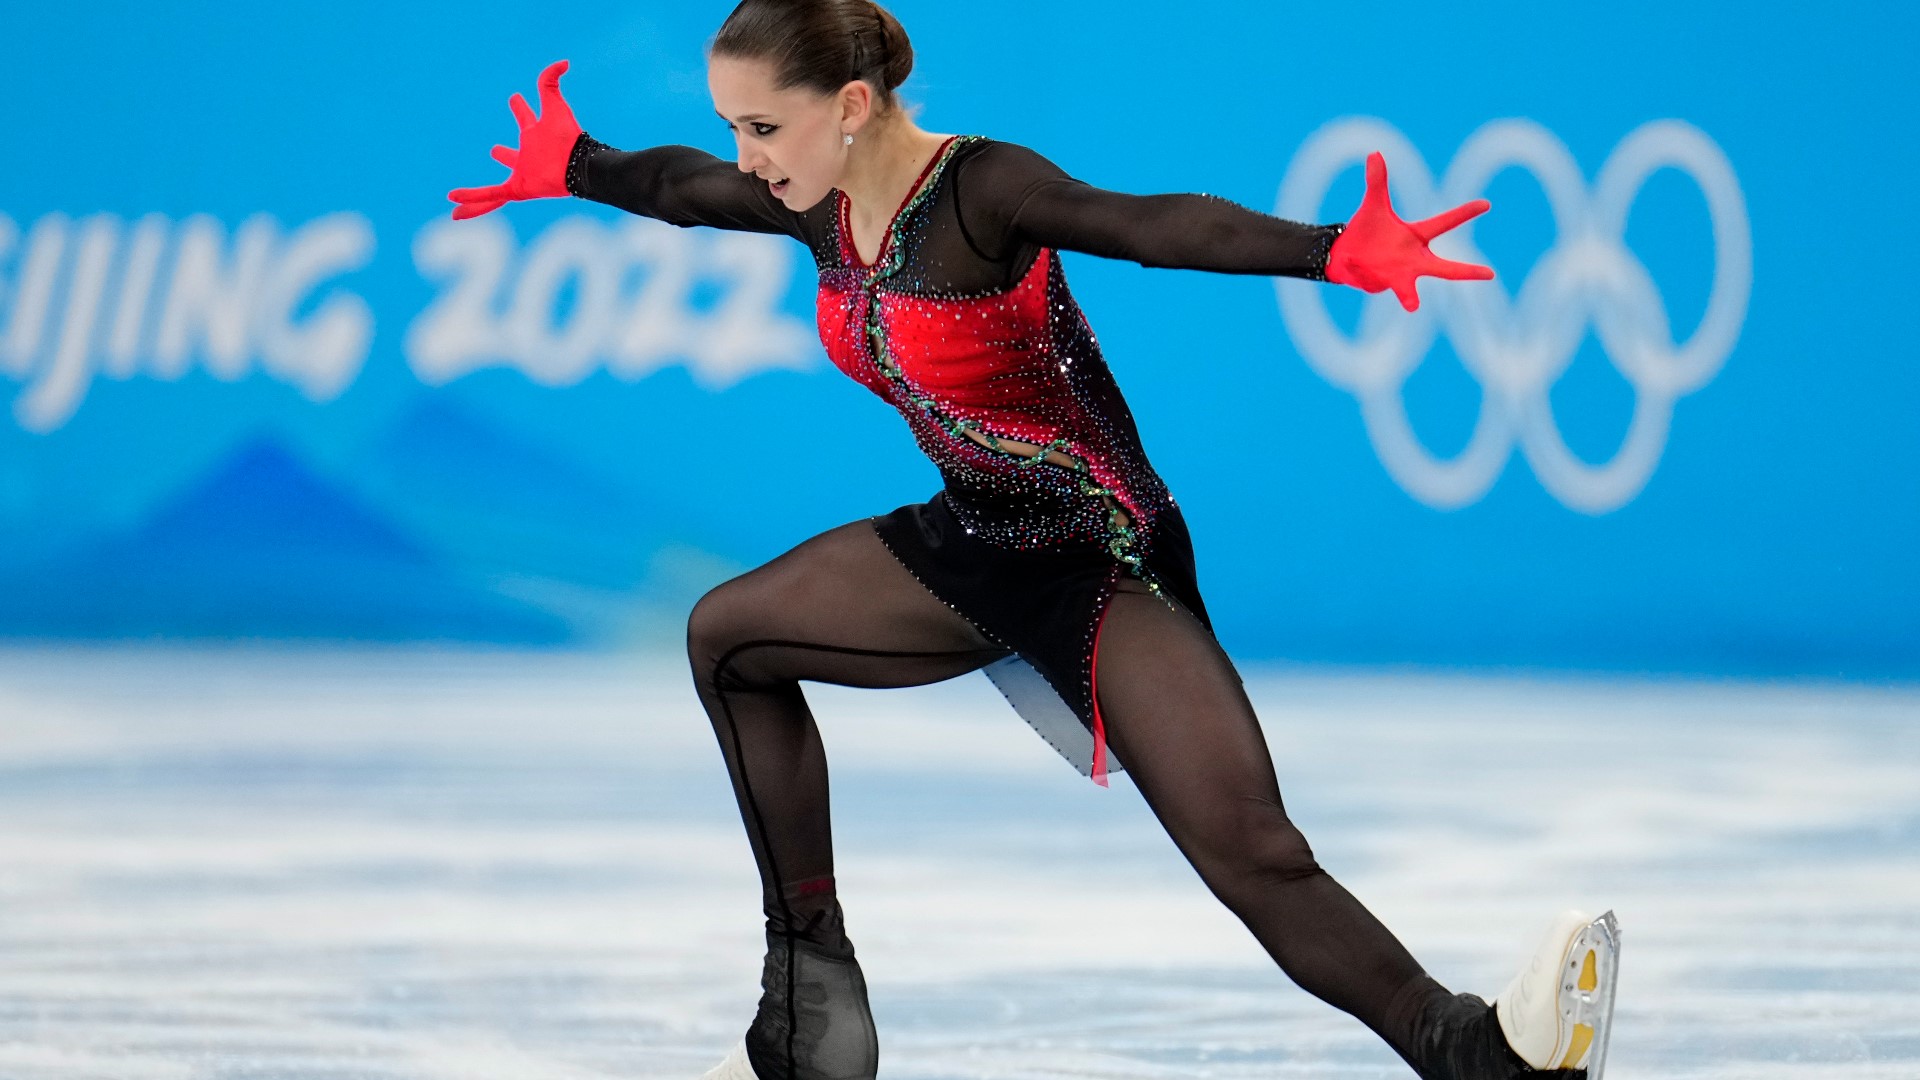 Womens figure skating competition kicks off Tuesday at Olympics kgw